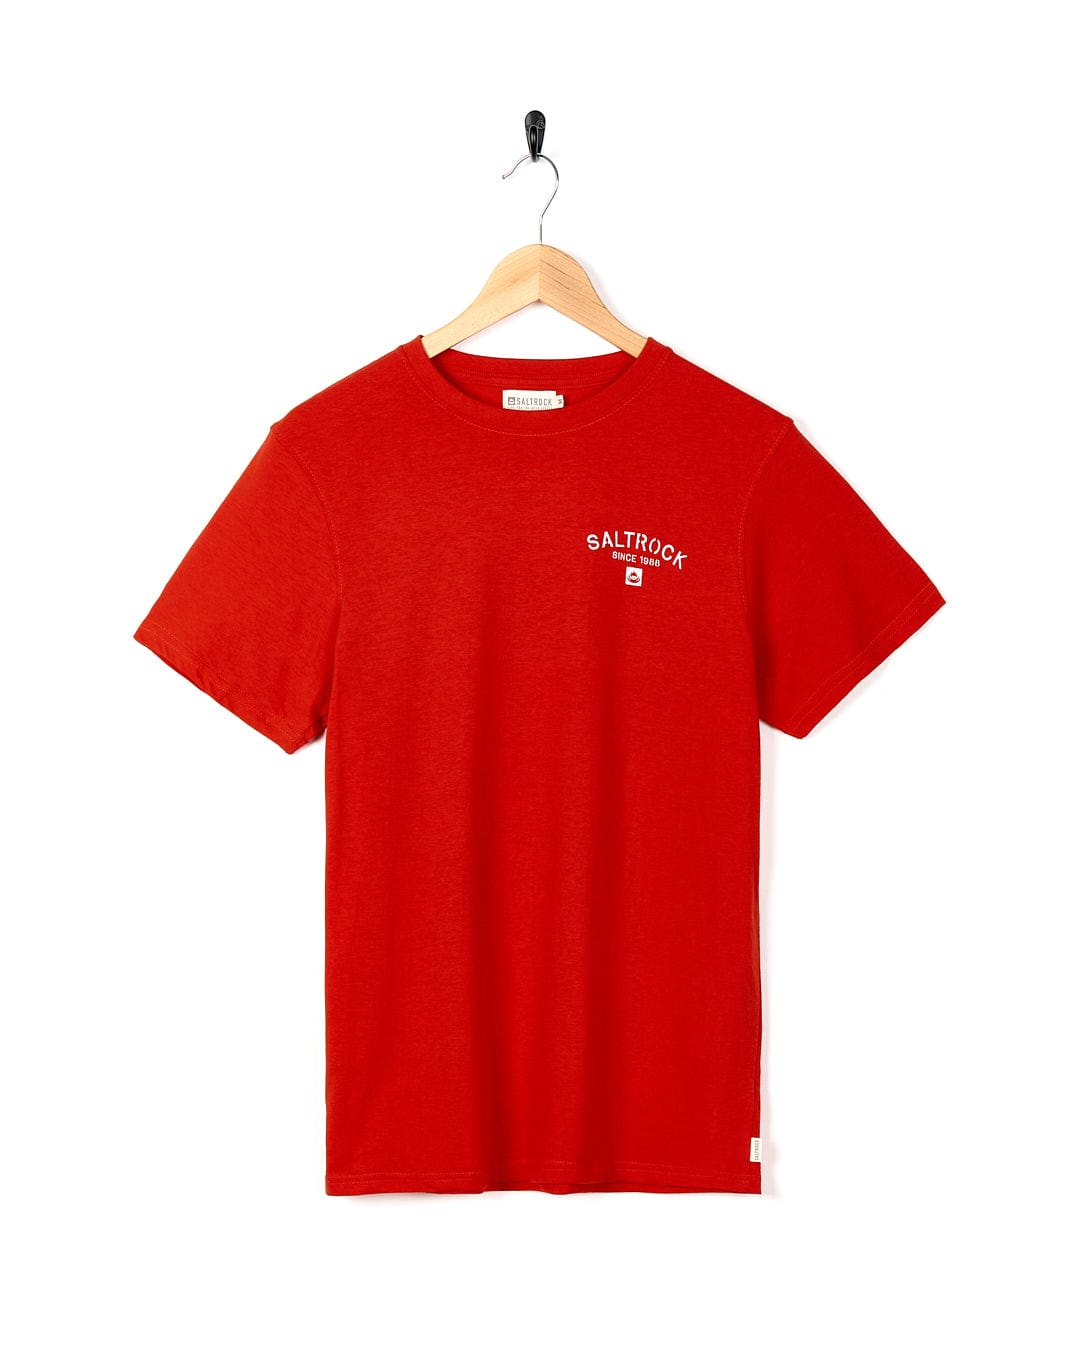 A Saltrock Stencil - Mens Padstow Location T-Shirt - Red with a white logo on it.